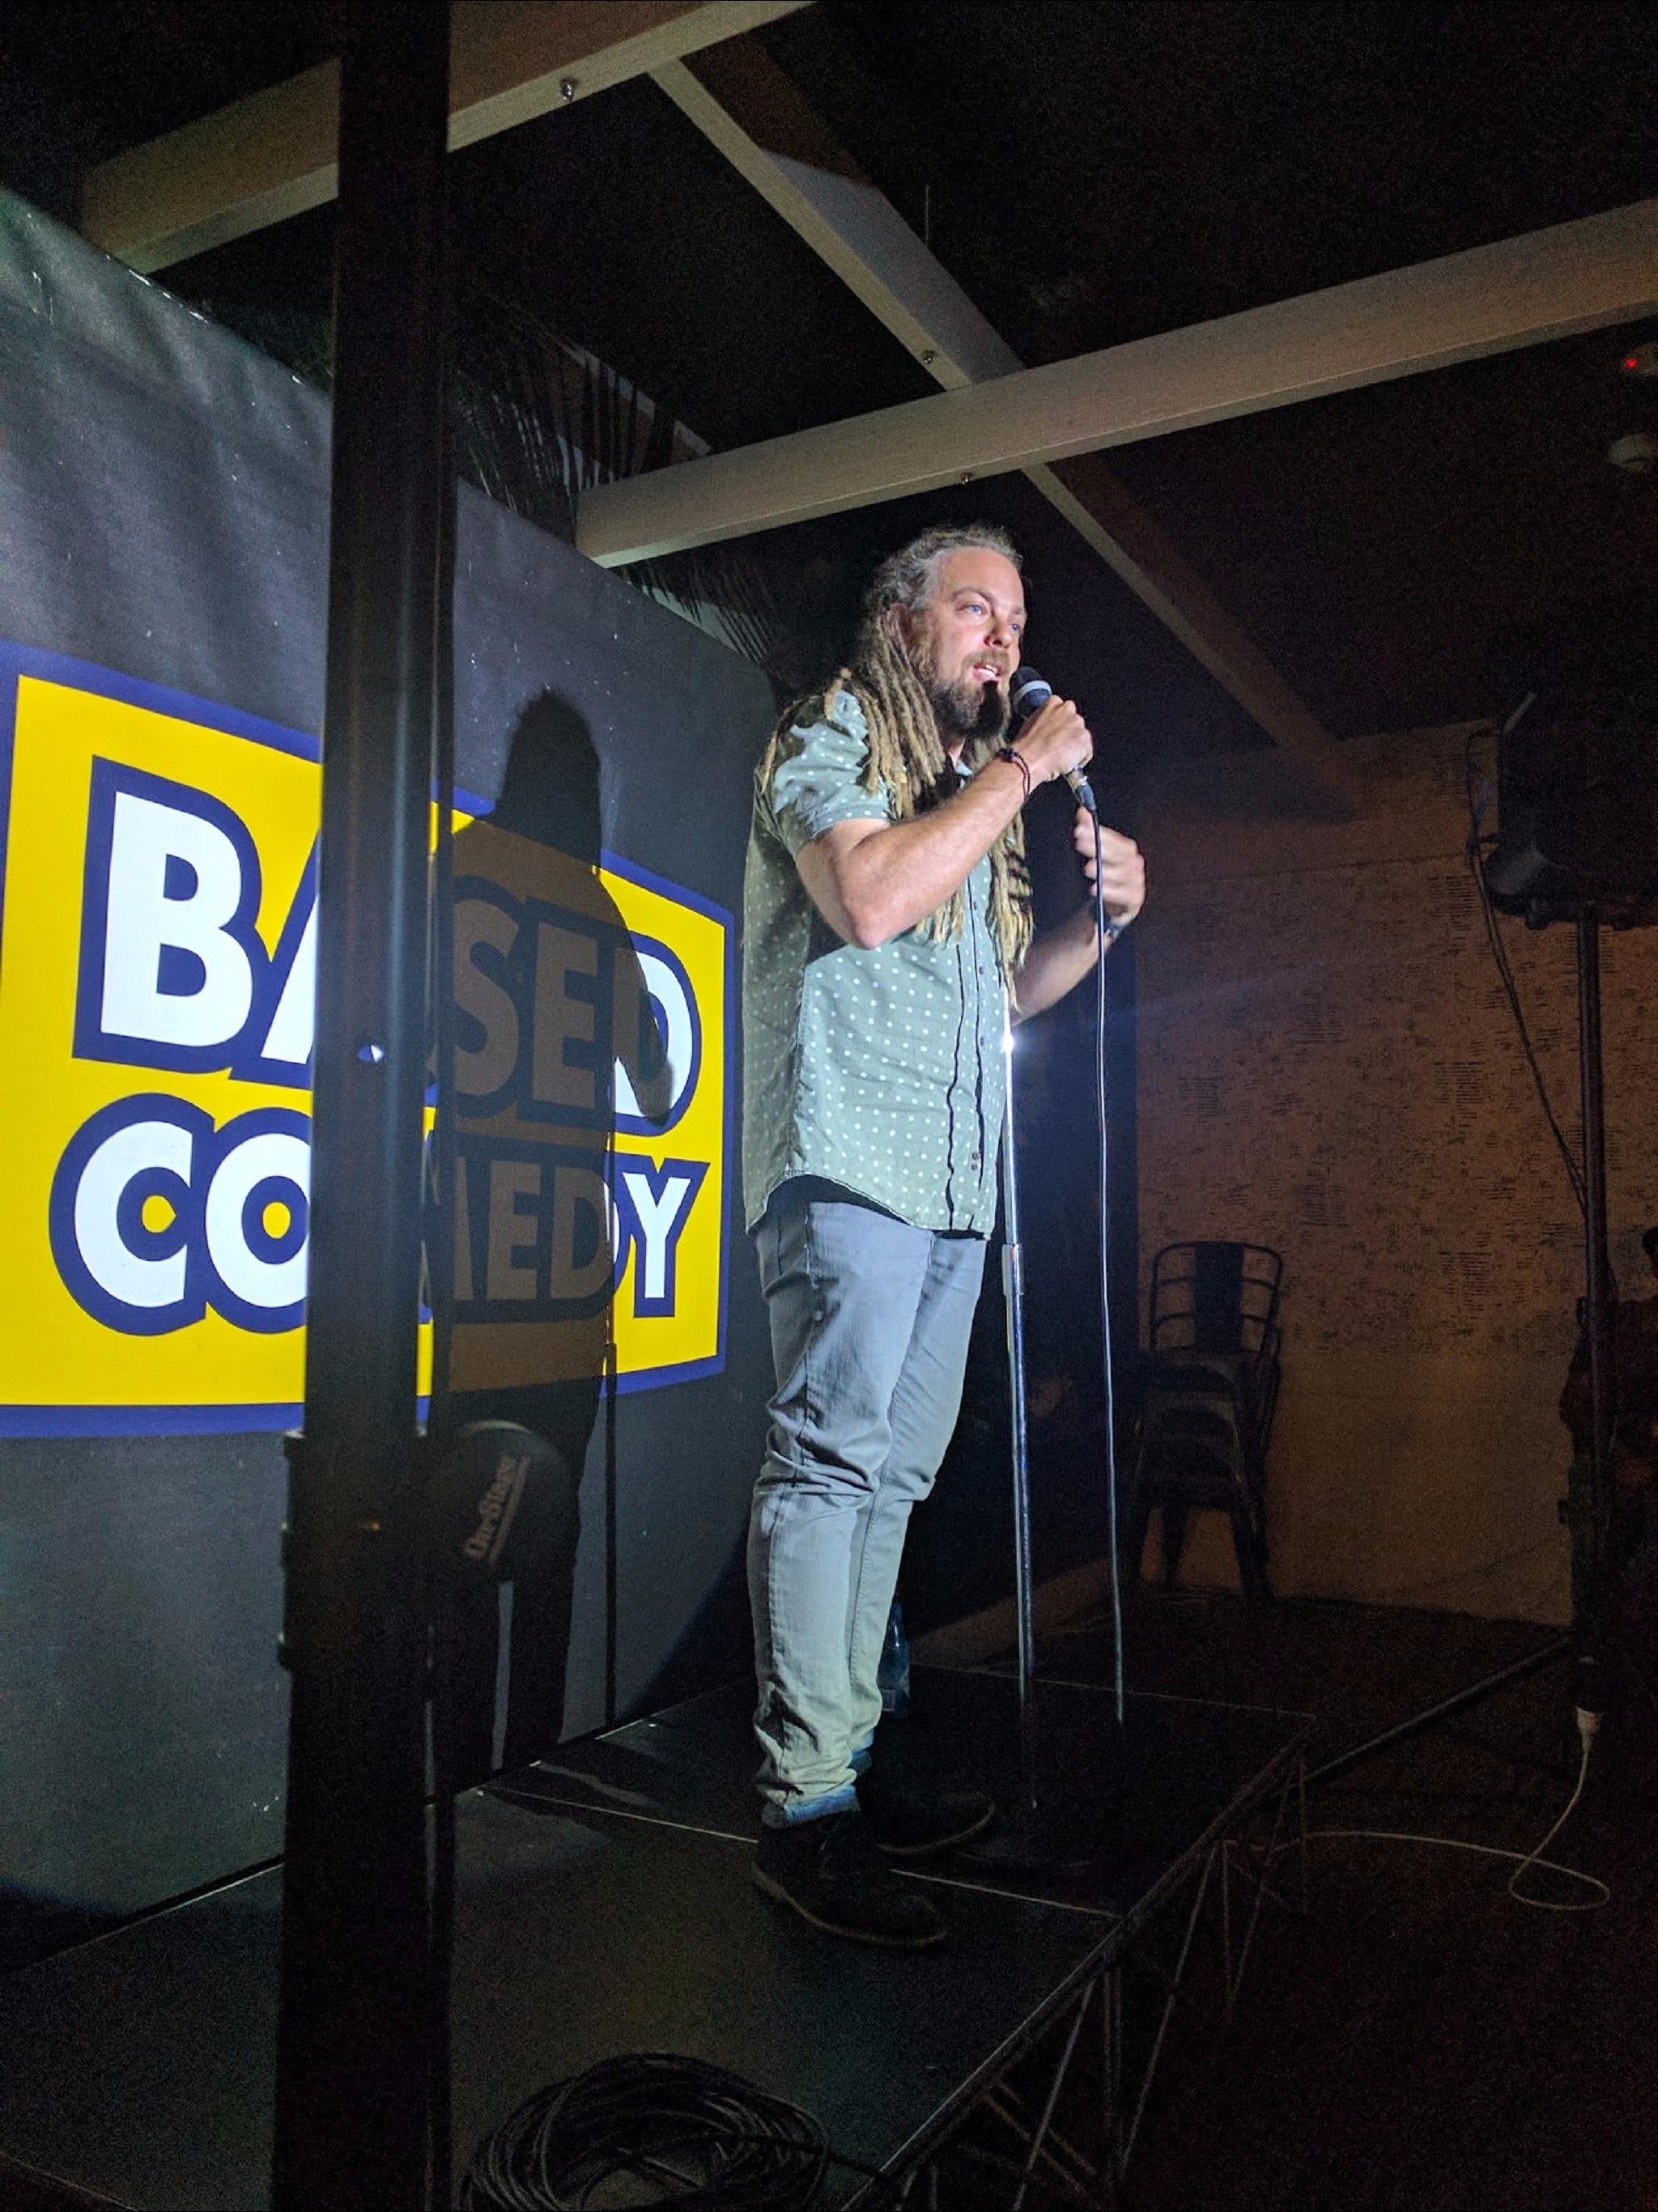 Based Comedy at The Palm Beach Hotel - Broome Tourism